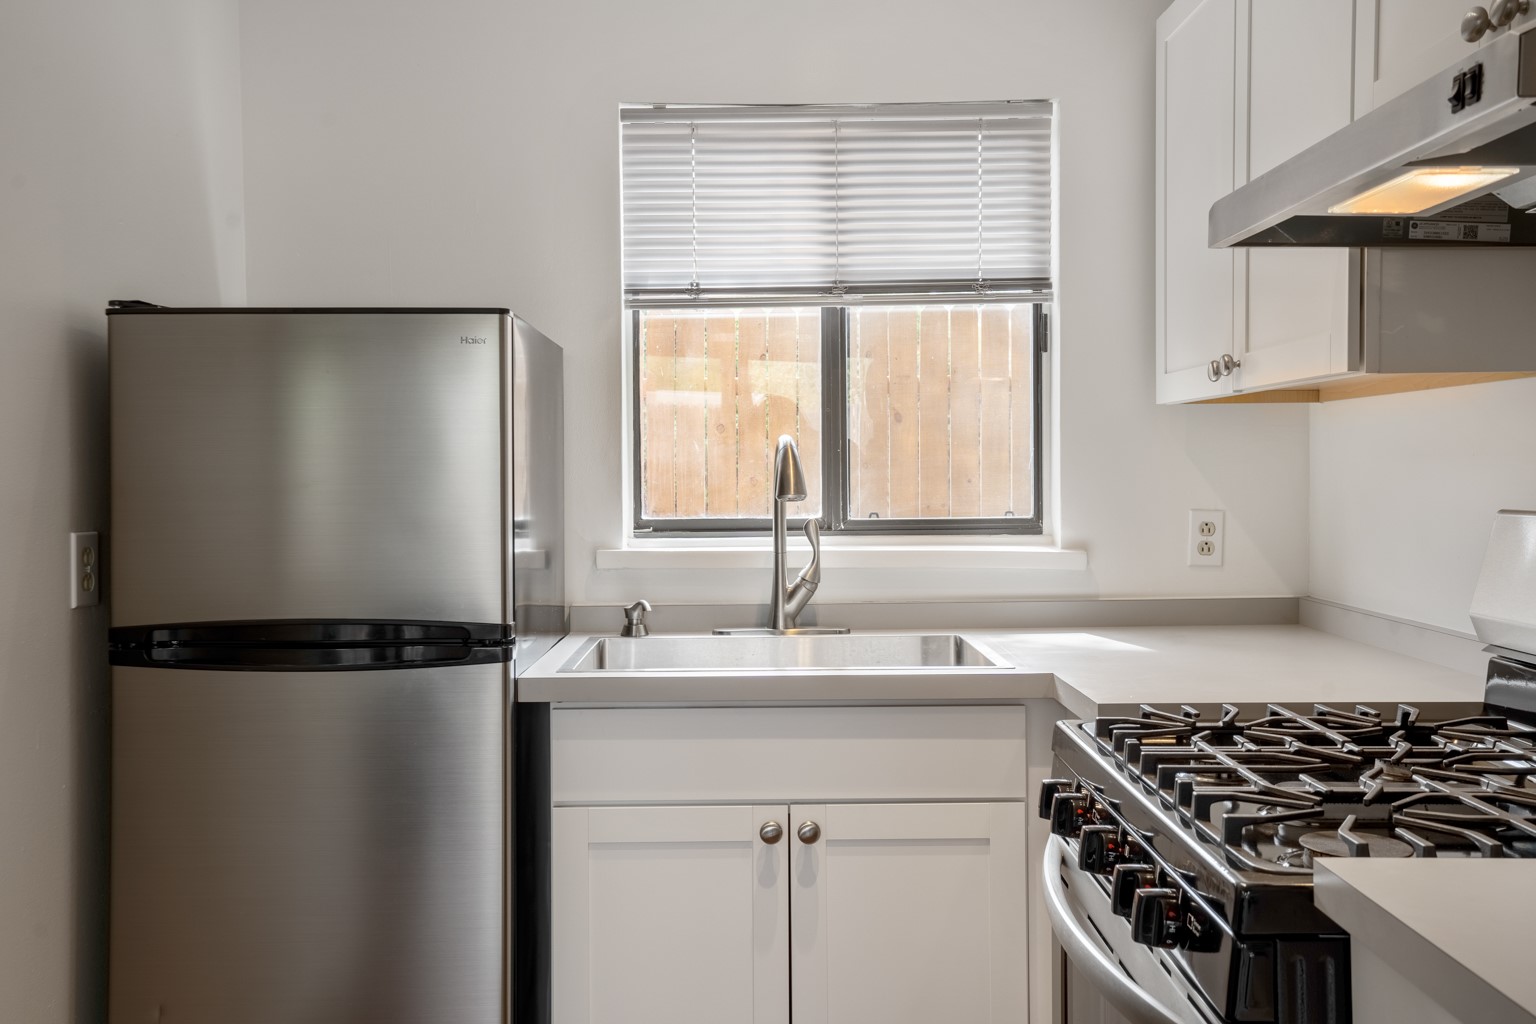 Stainless steel appliances, formica countertops  and new cabinetry